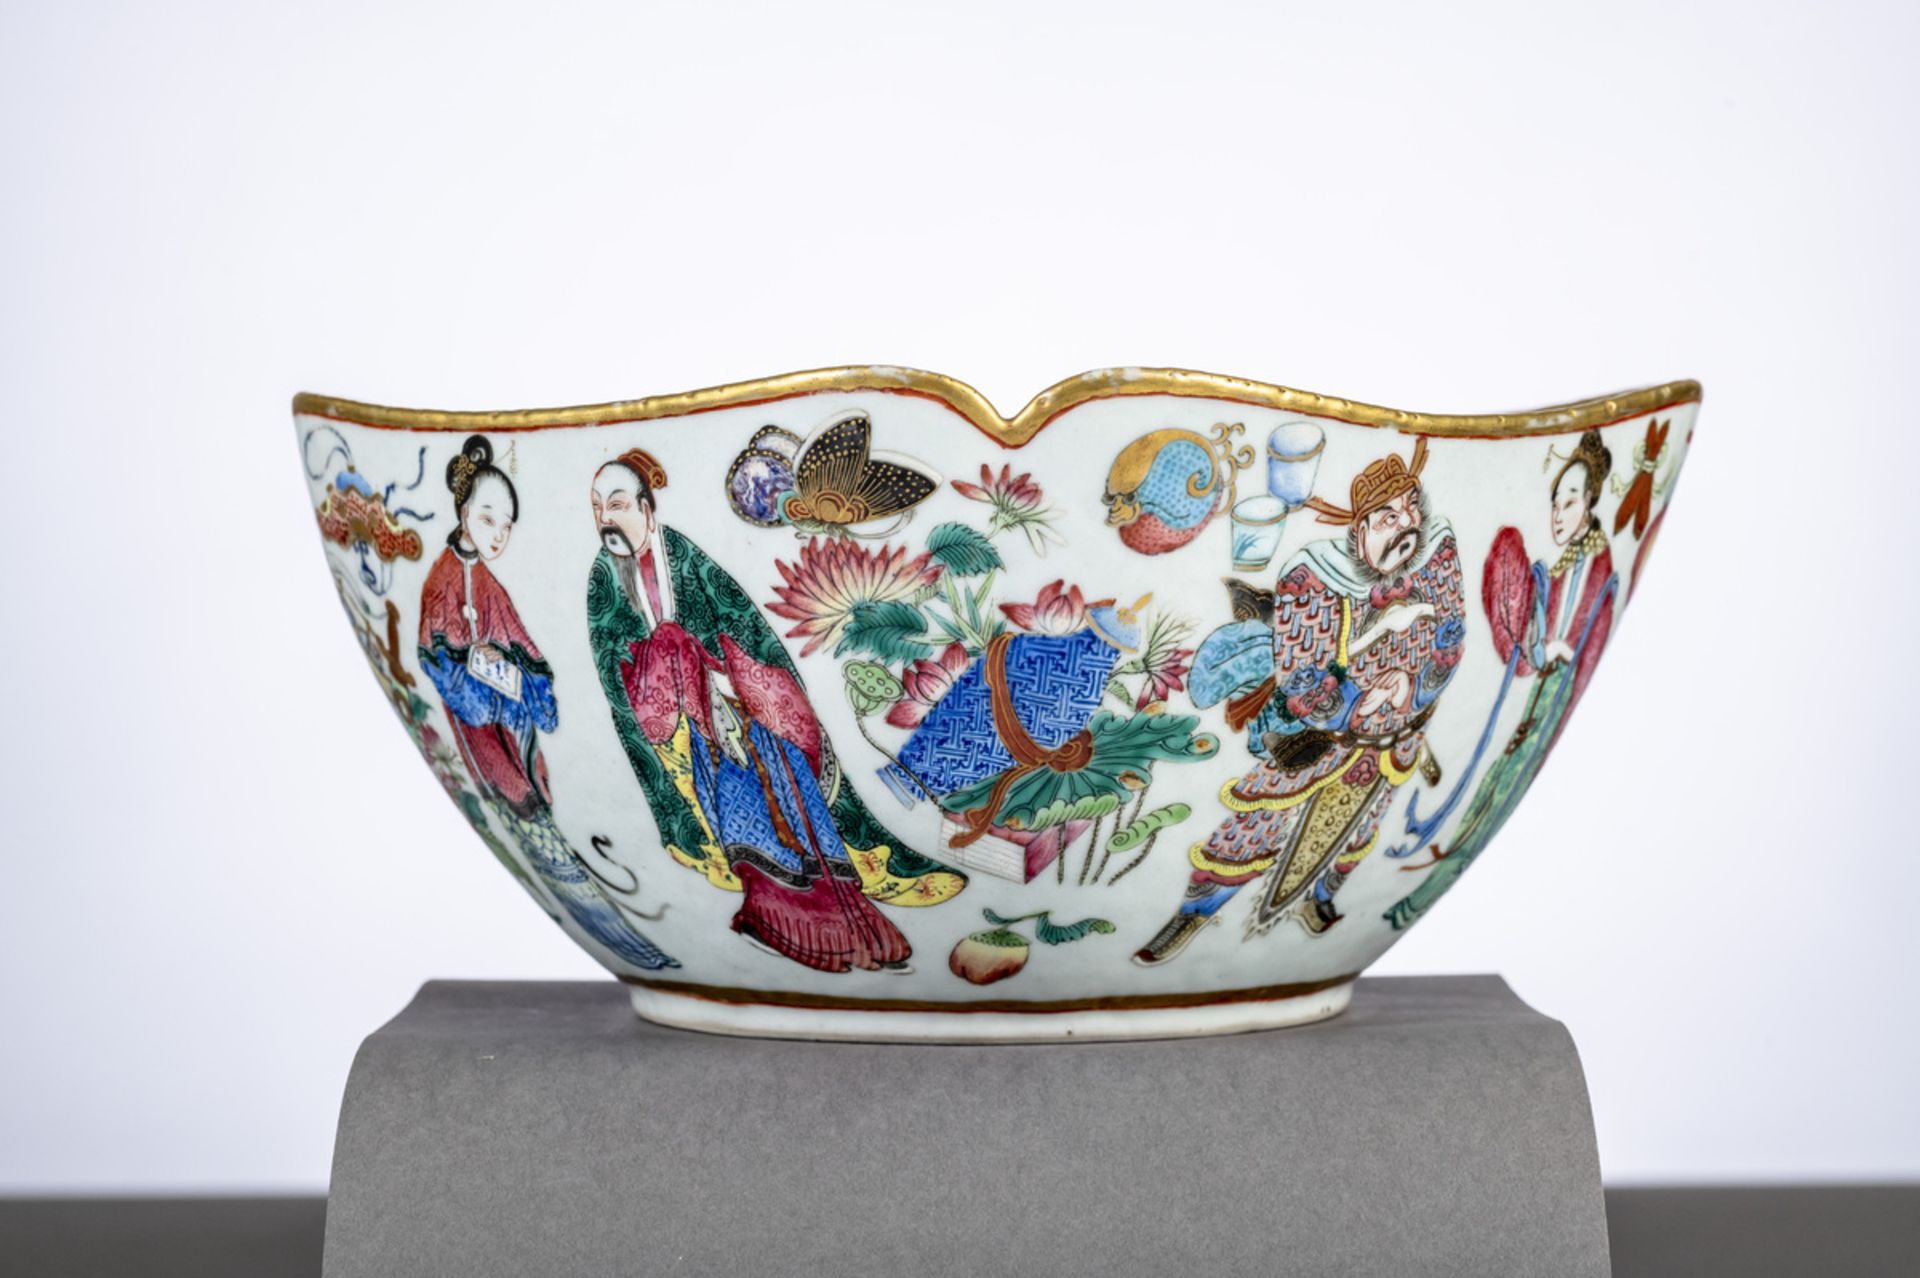 Lobed bowl in Chinese famille rose porcelain with gold rims 'characters', 19th century (11x24x24cm) - Bild 2 aus 5